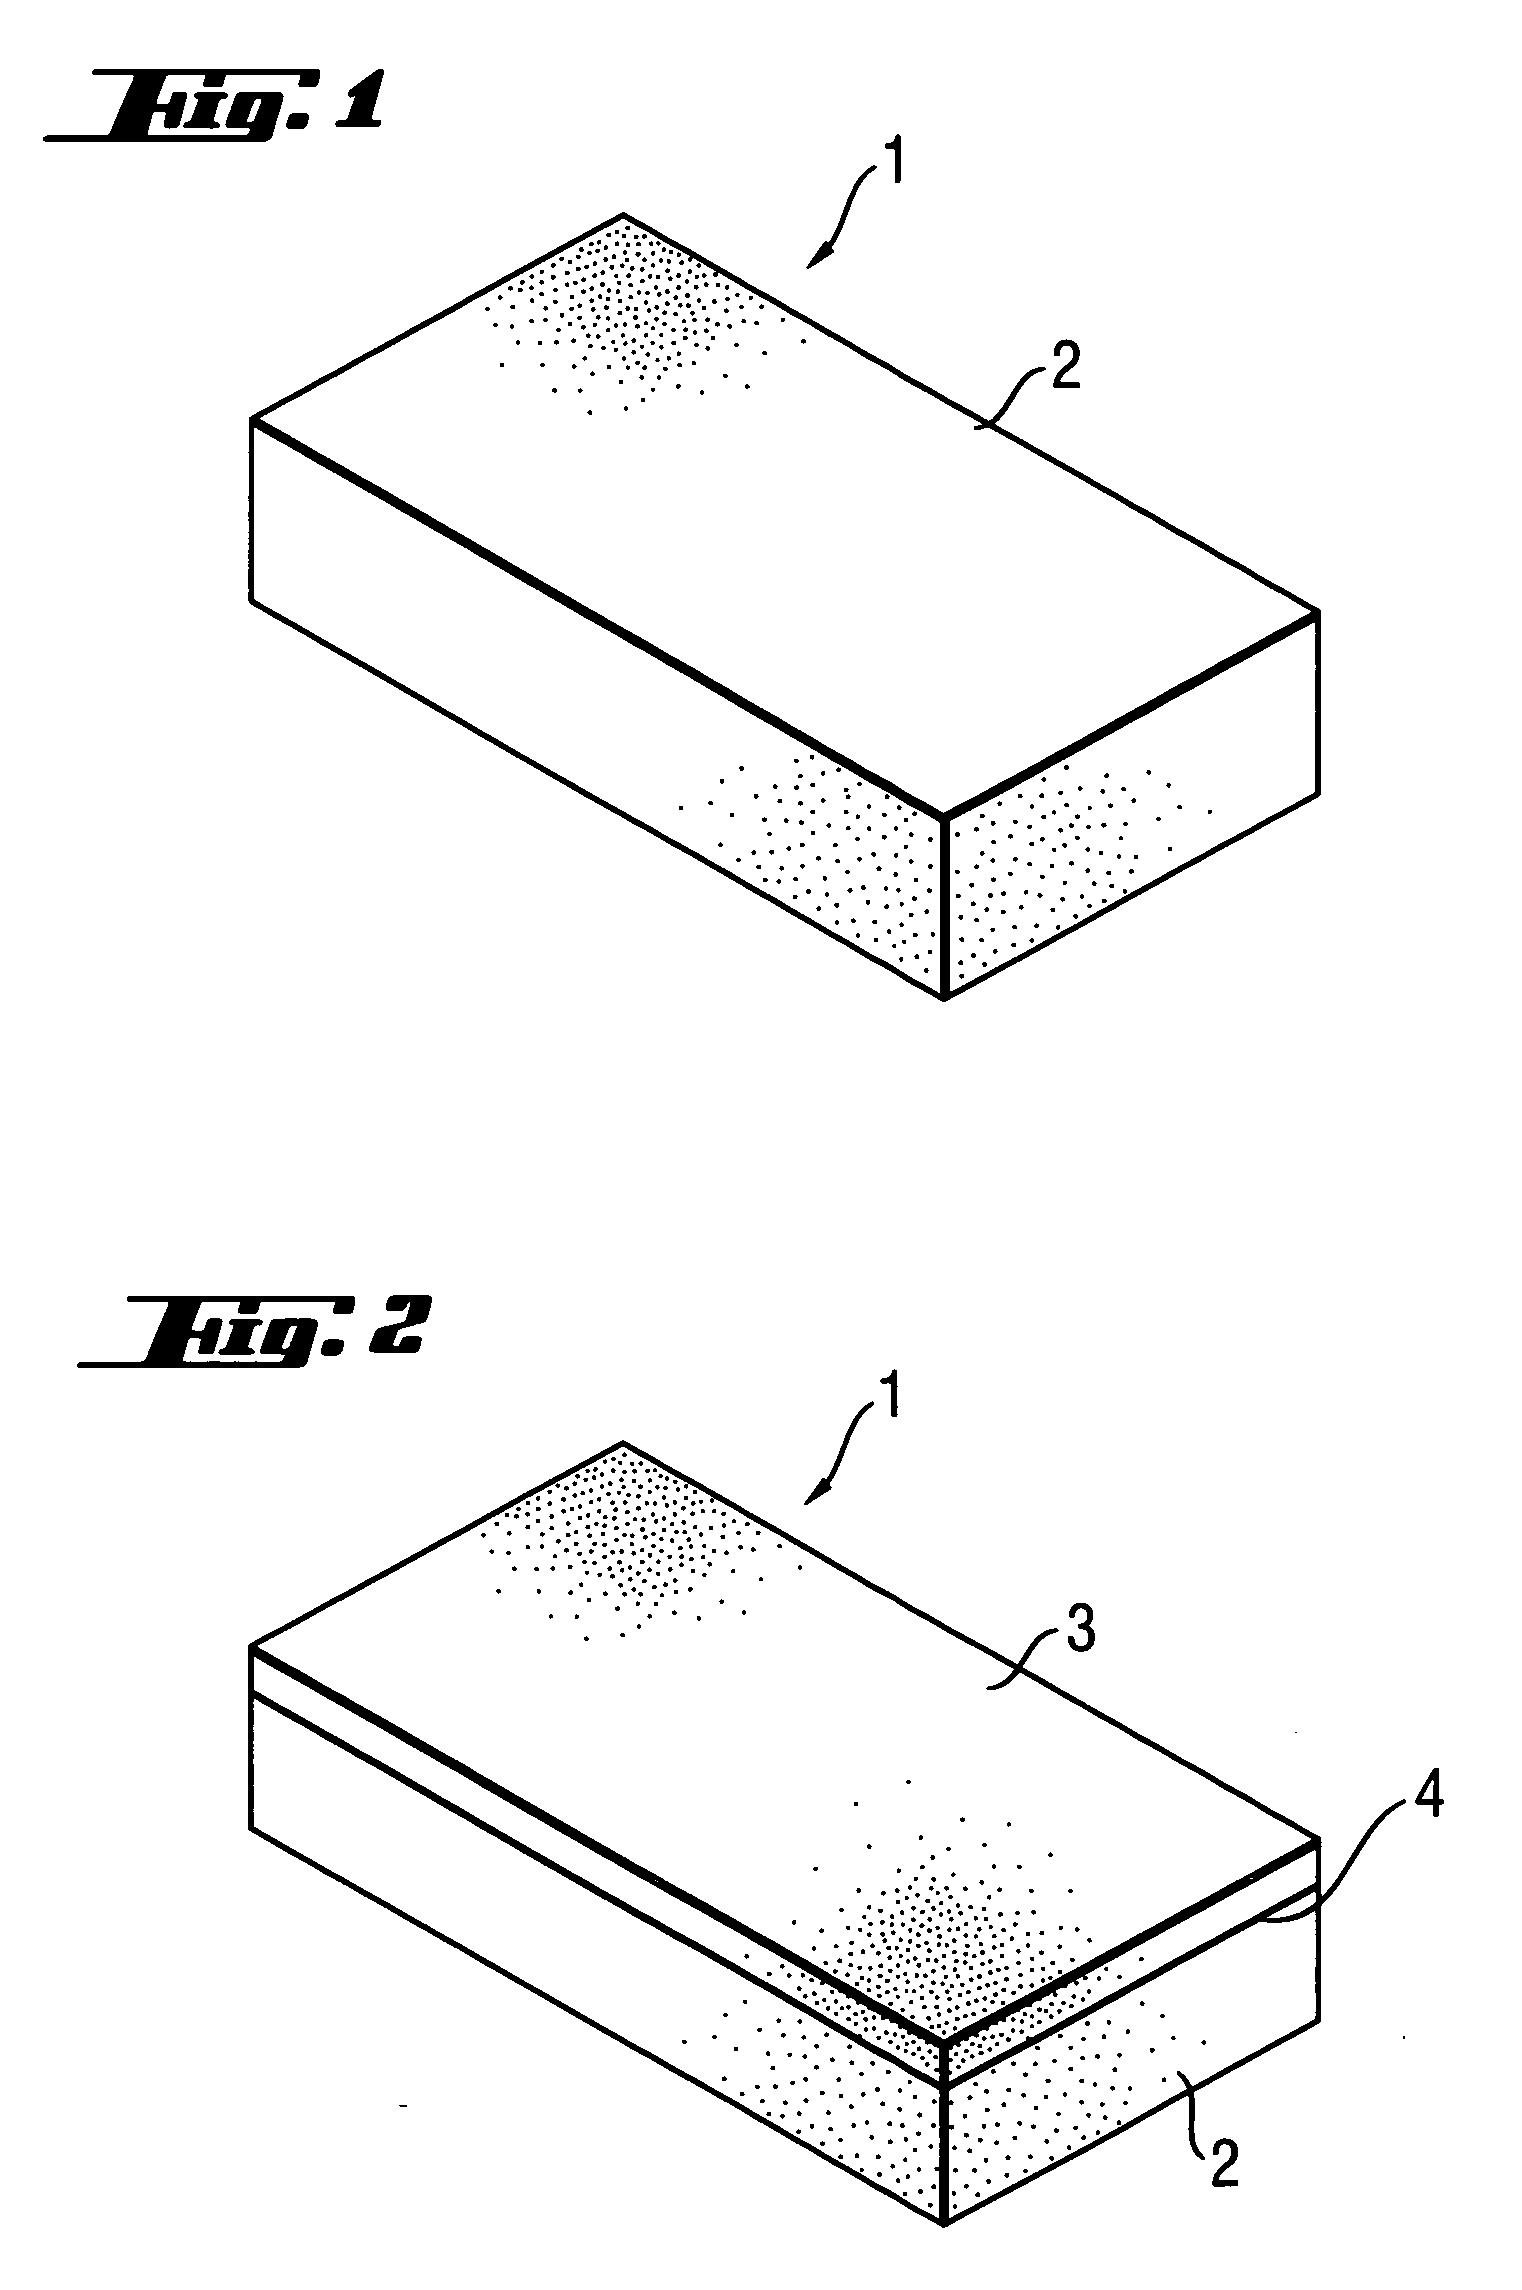 Cleaning implement comprising a modified open-cell foam